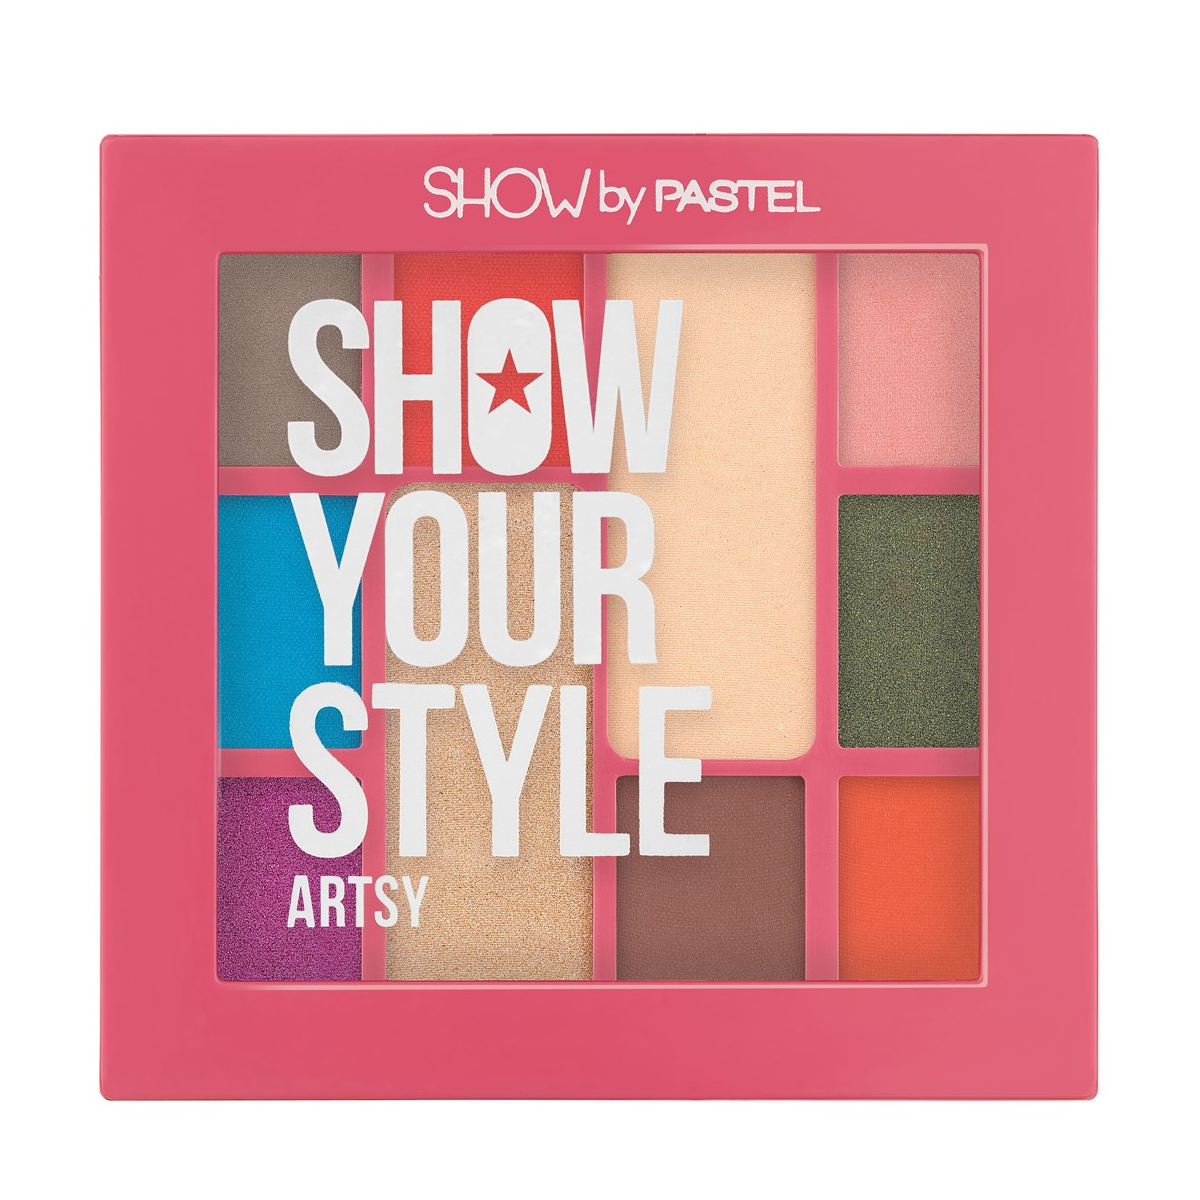 Pastel Show By Pastel Show Your Style Artsy Far Seti